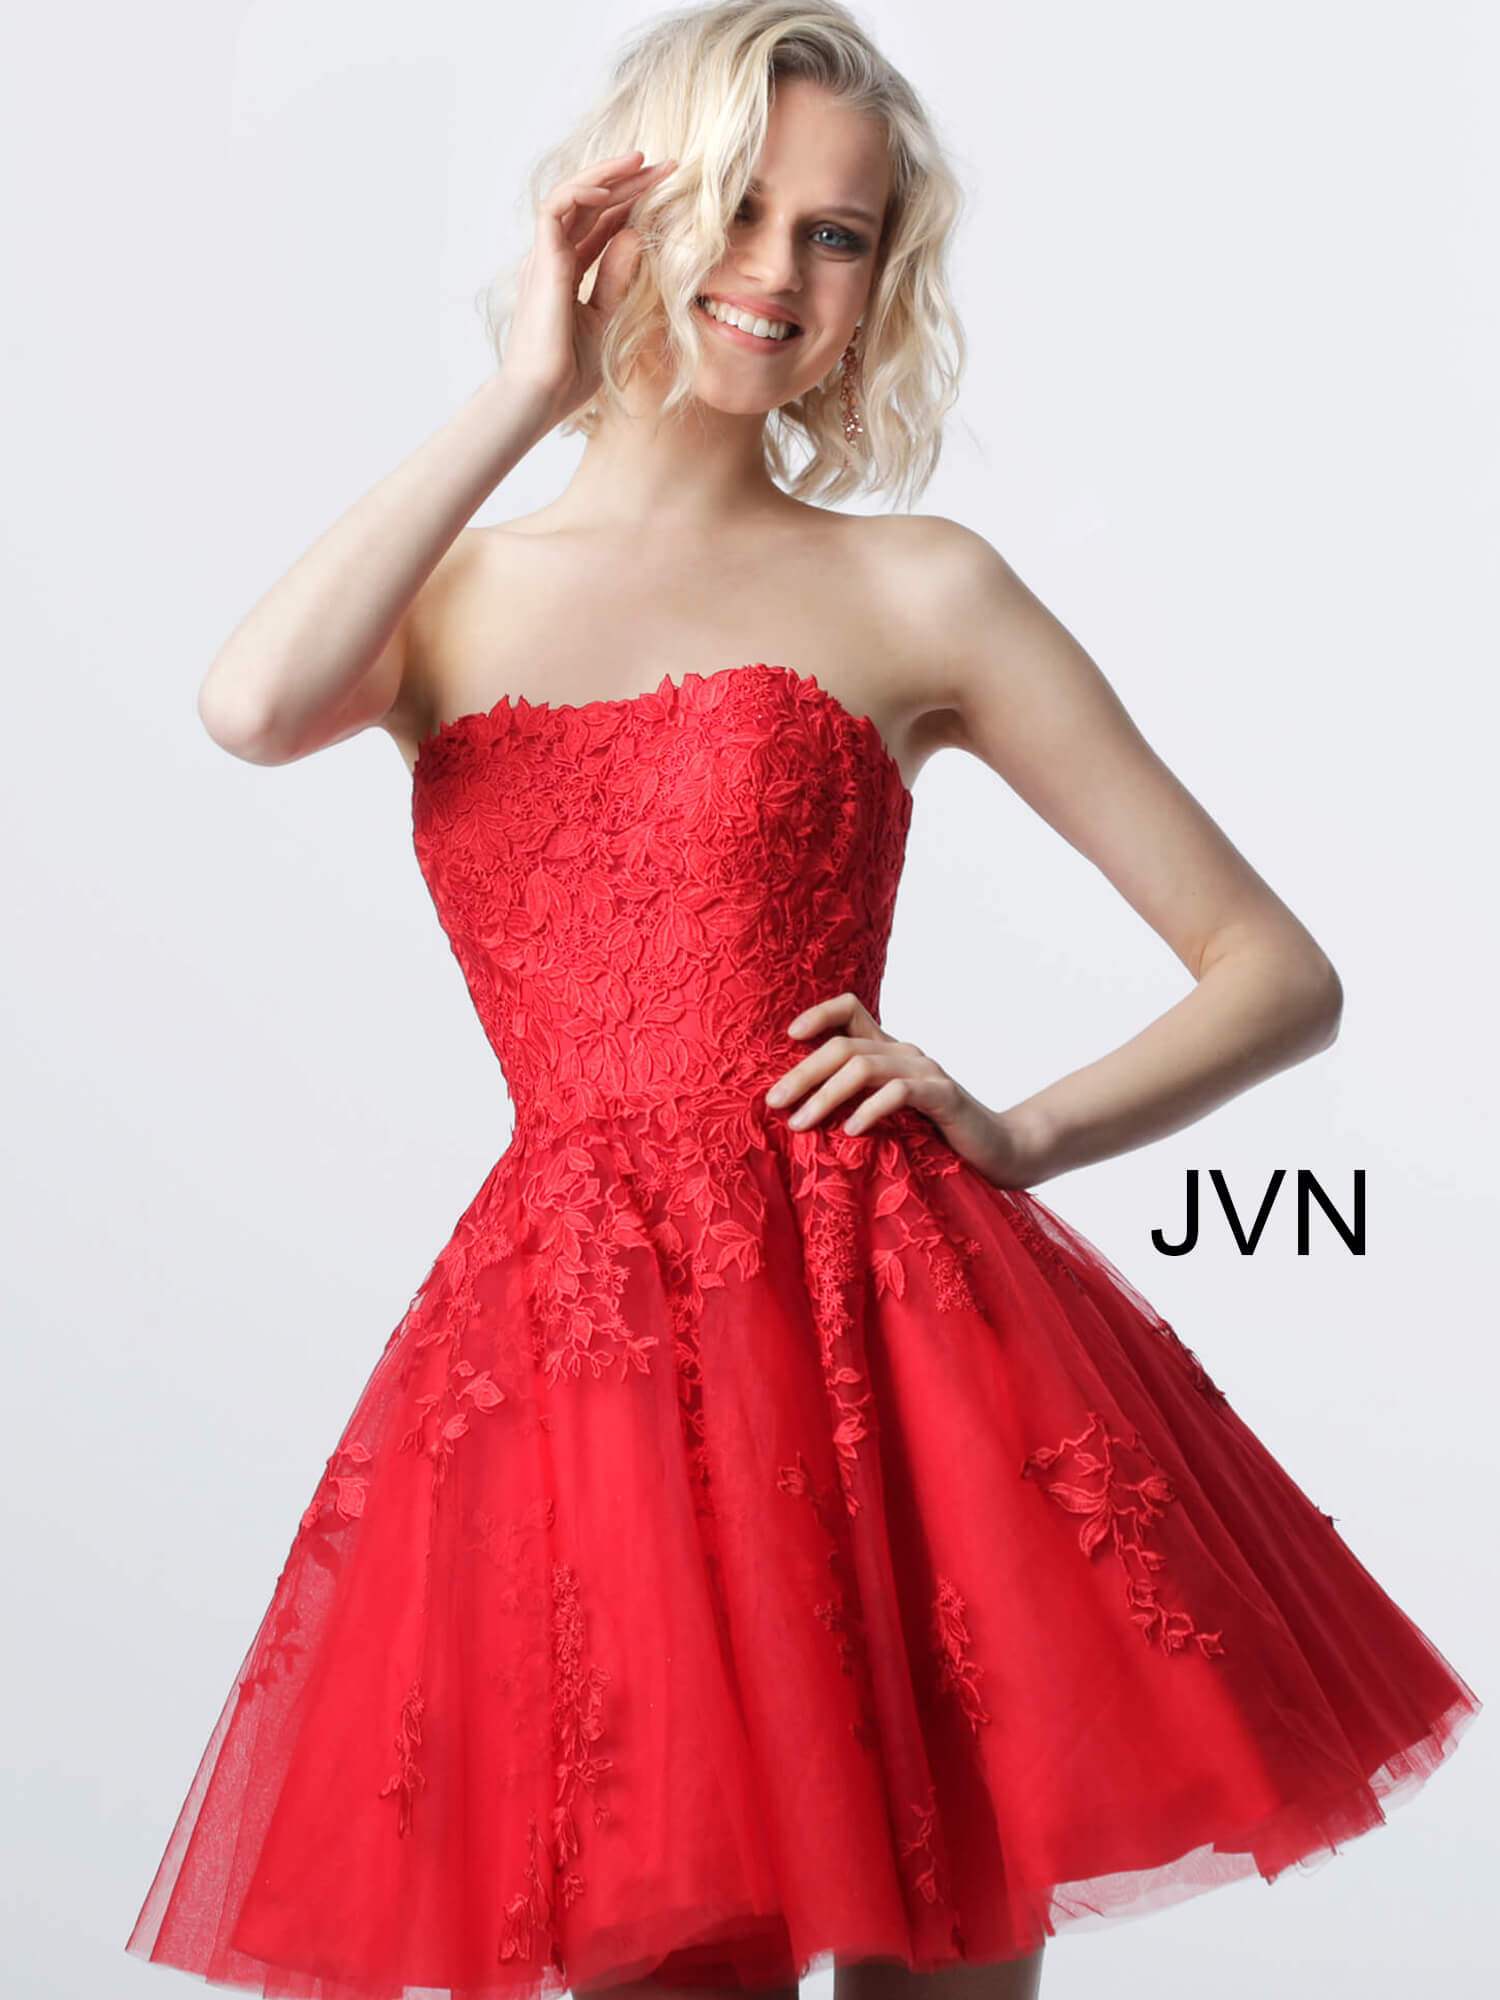 Red Strapless Dress Hot Sale, 53% OFF ...